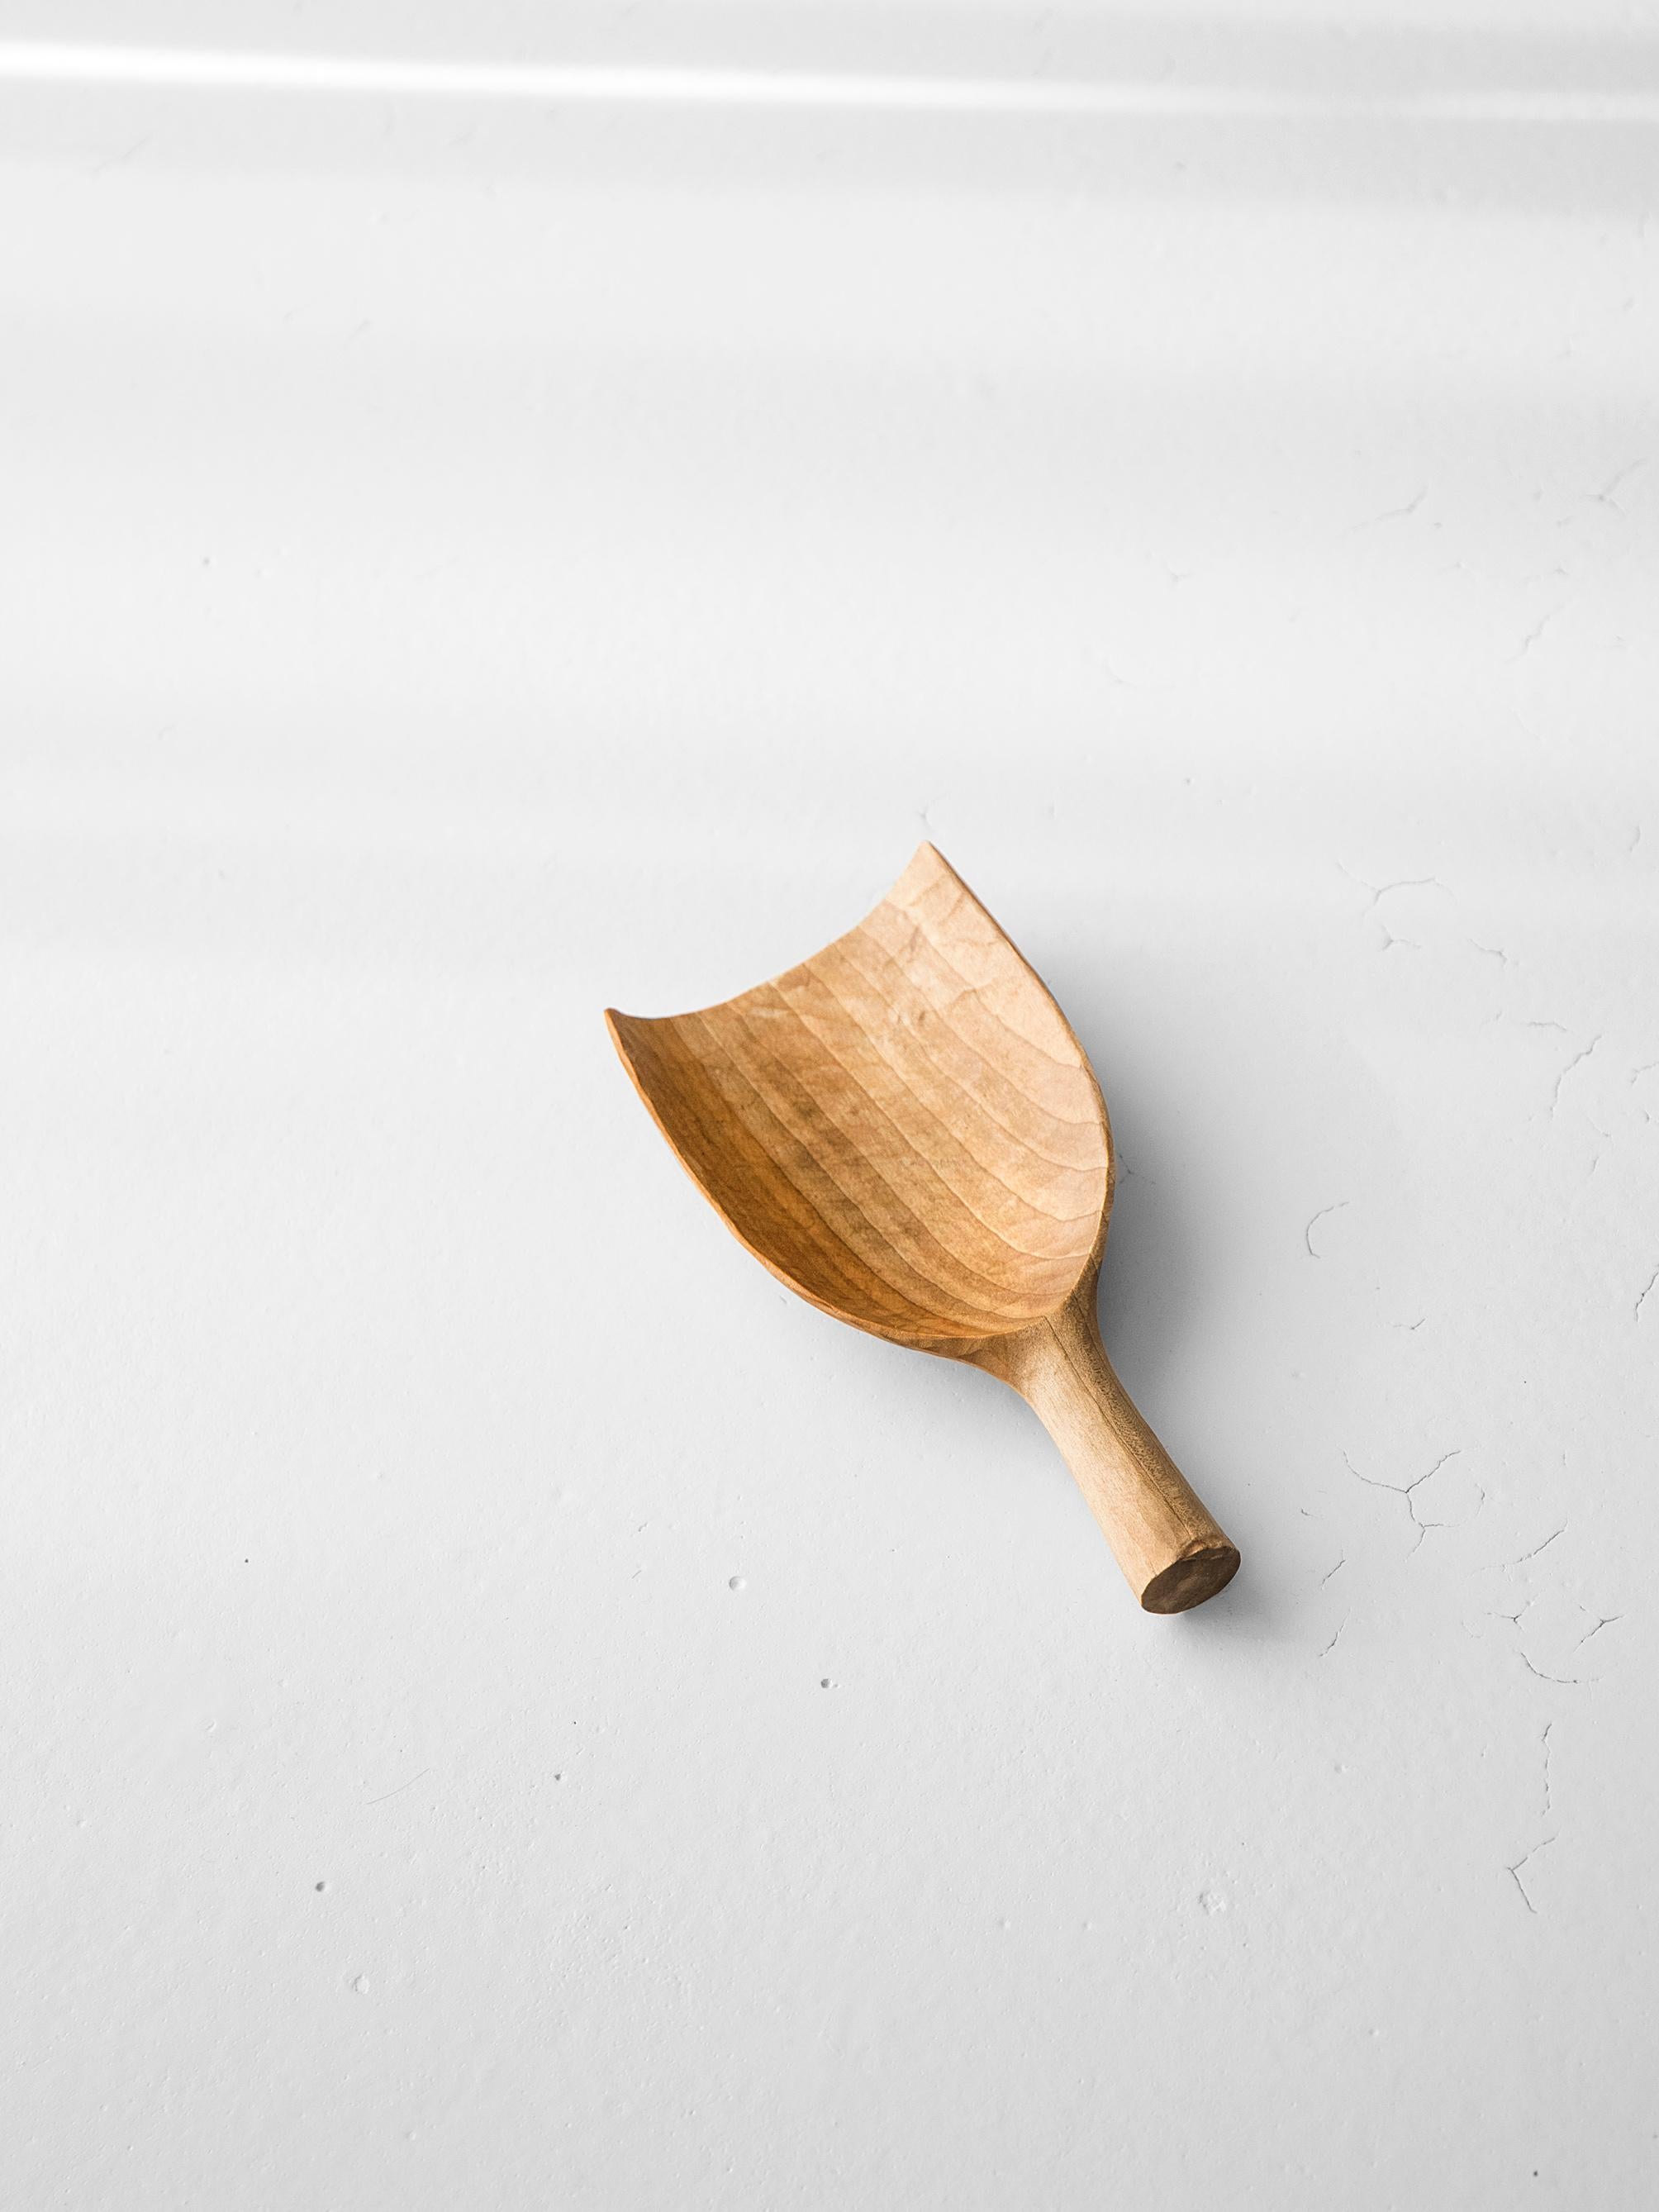 This piece is part of the series of sculptural spoons made by Ferréol Babin. Made of magnolia brought back from a trip to Japan, this spoon required many hours of work. It was entirely hand carved with a gouge for the inner part and a kiridashi -